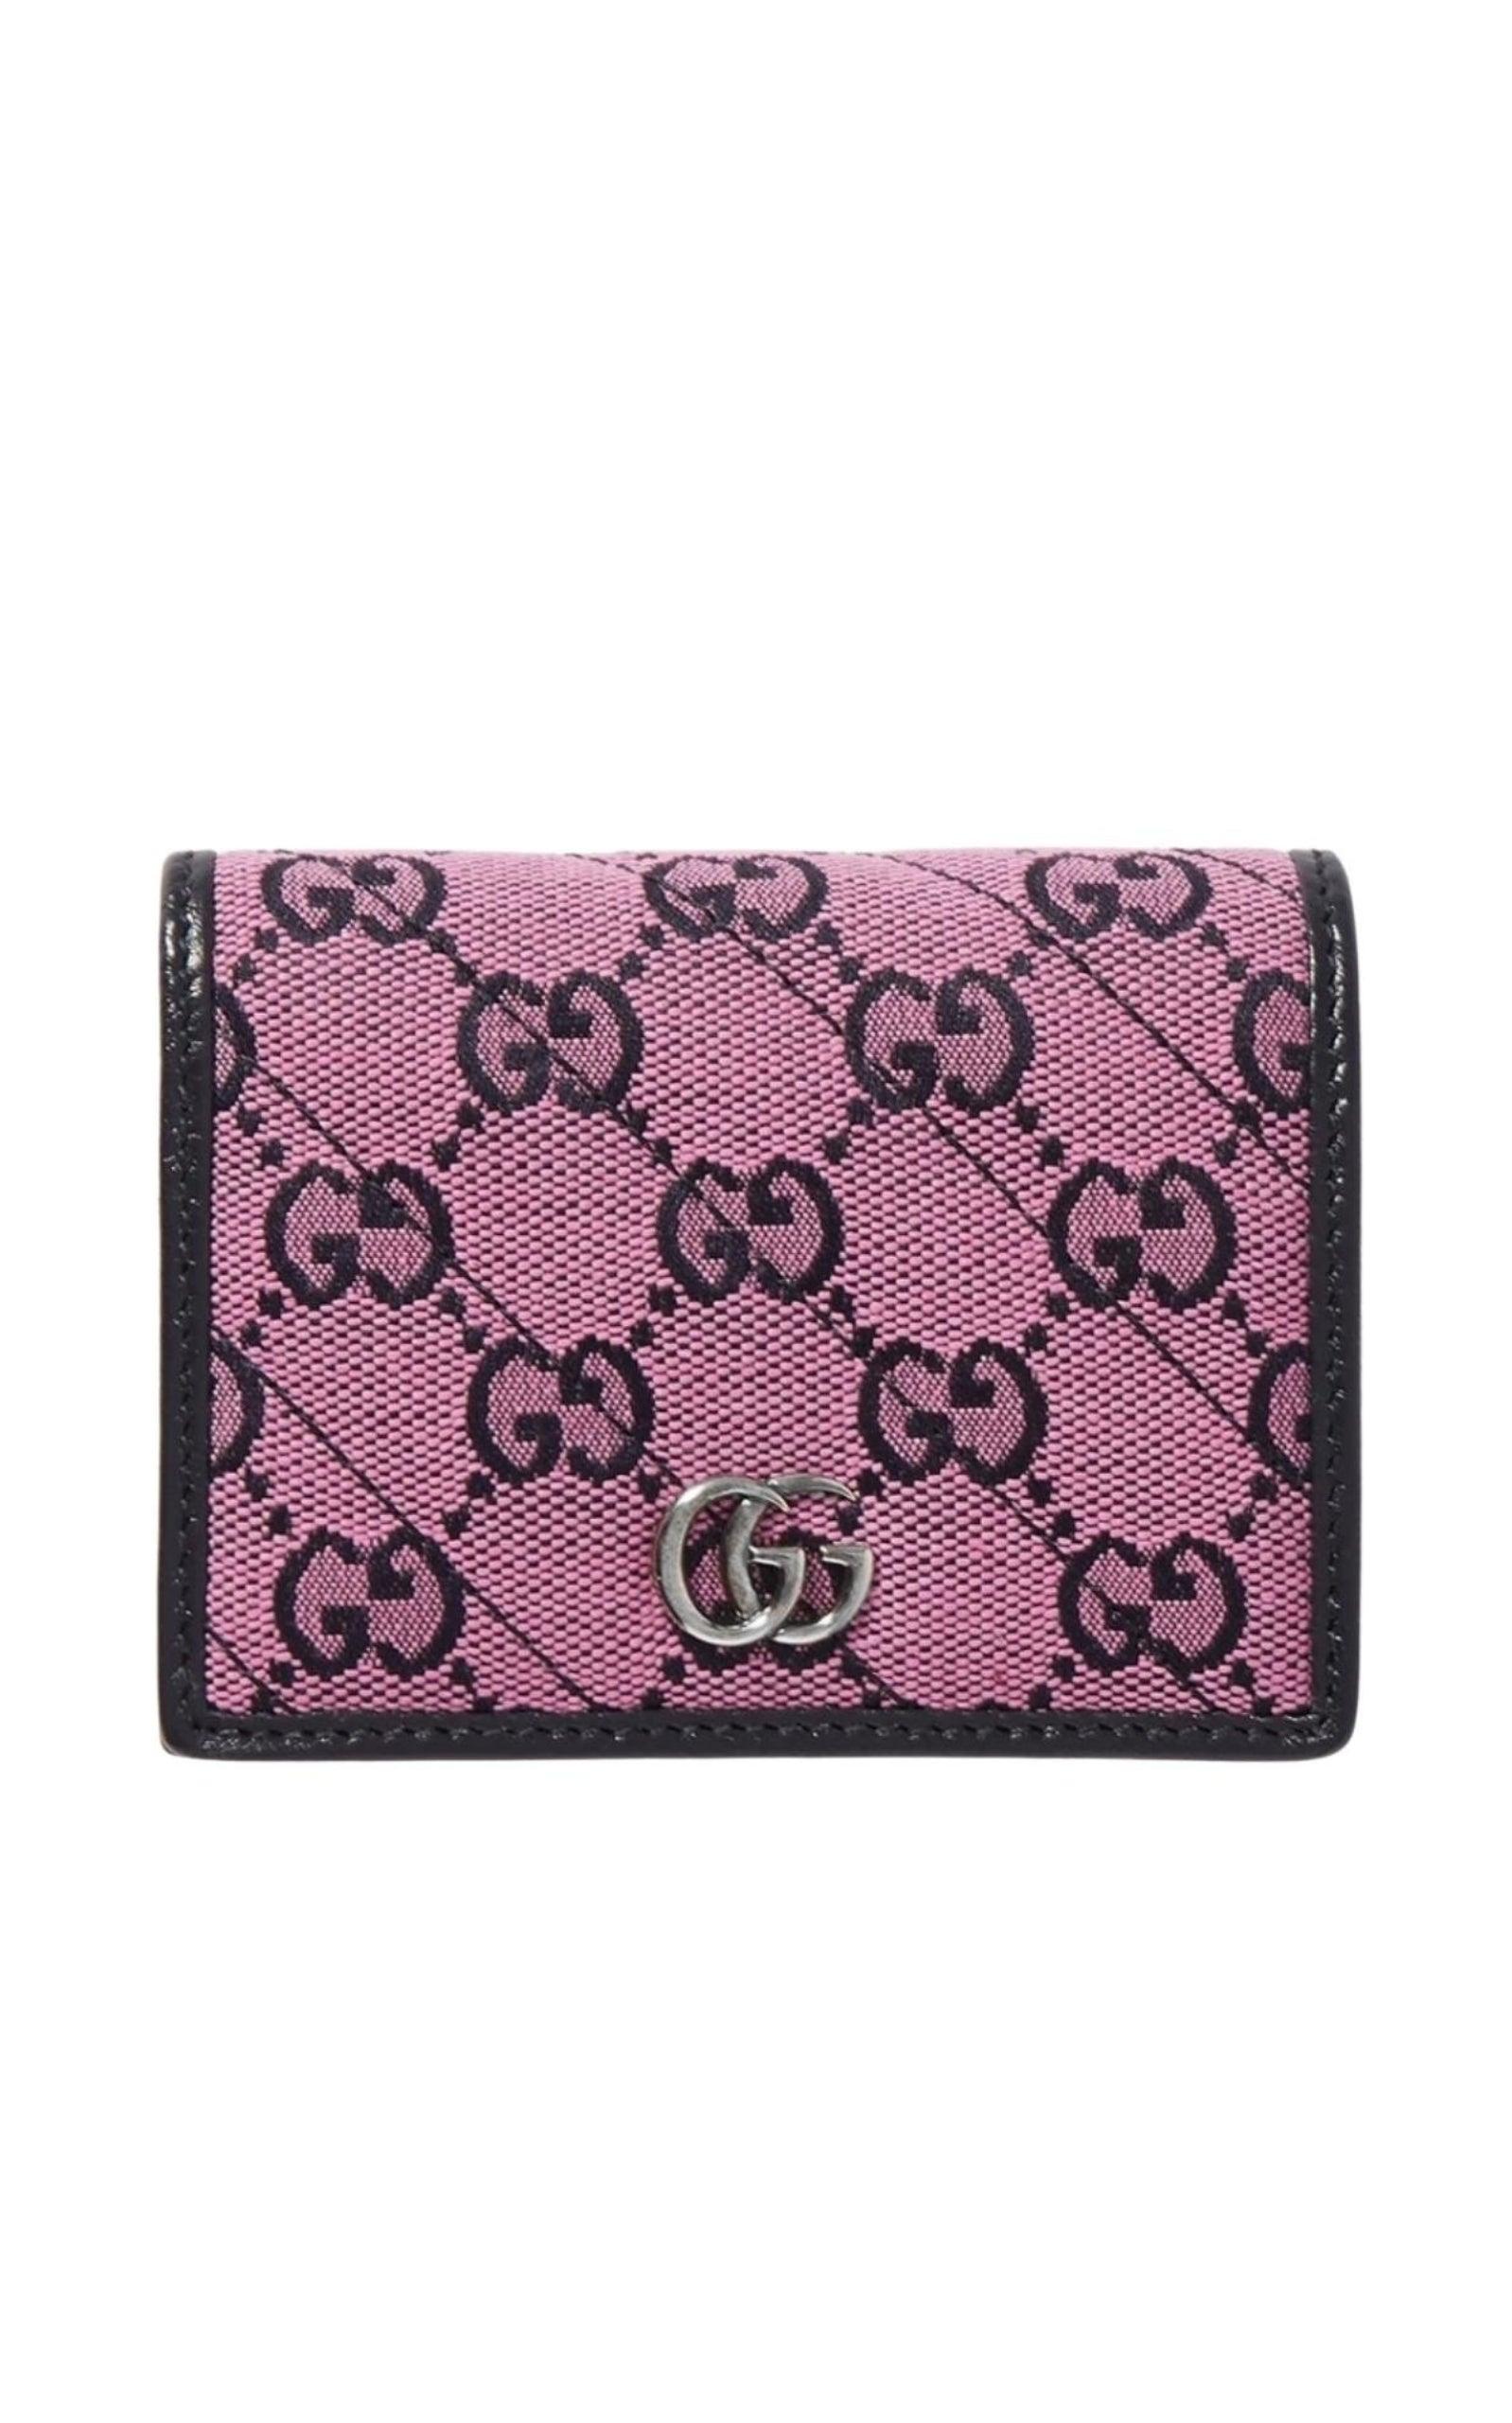 Gucci Women's Marmont Leather Key Case - Pink in Black